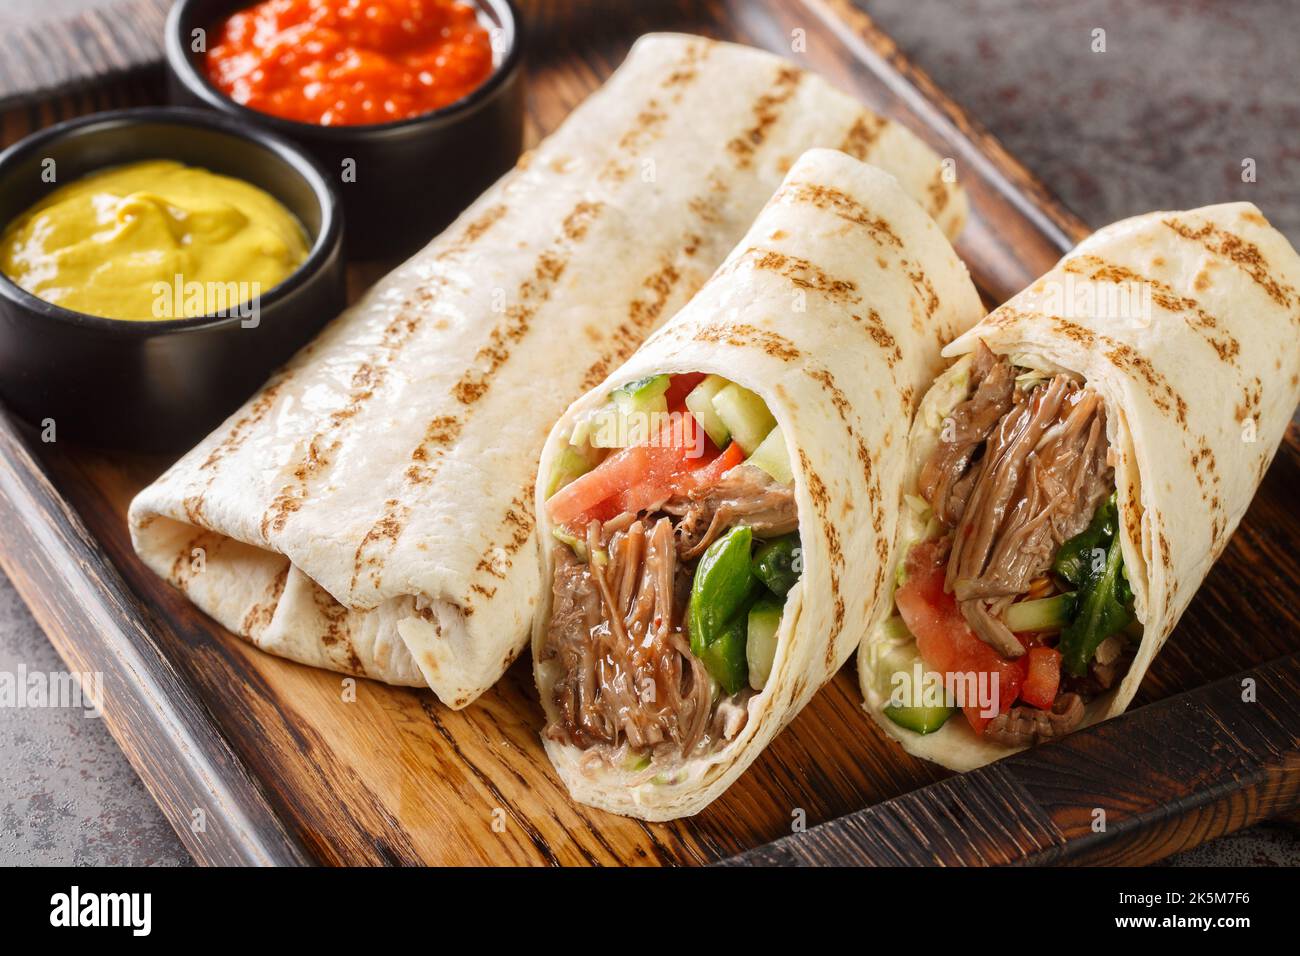 Doner kebab or shawarma with beef and fresh vegetables closeup on the wooden board on the table. Horizontal Stock Photo